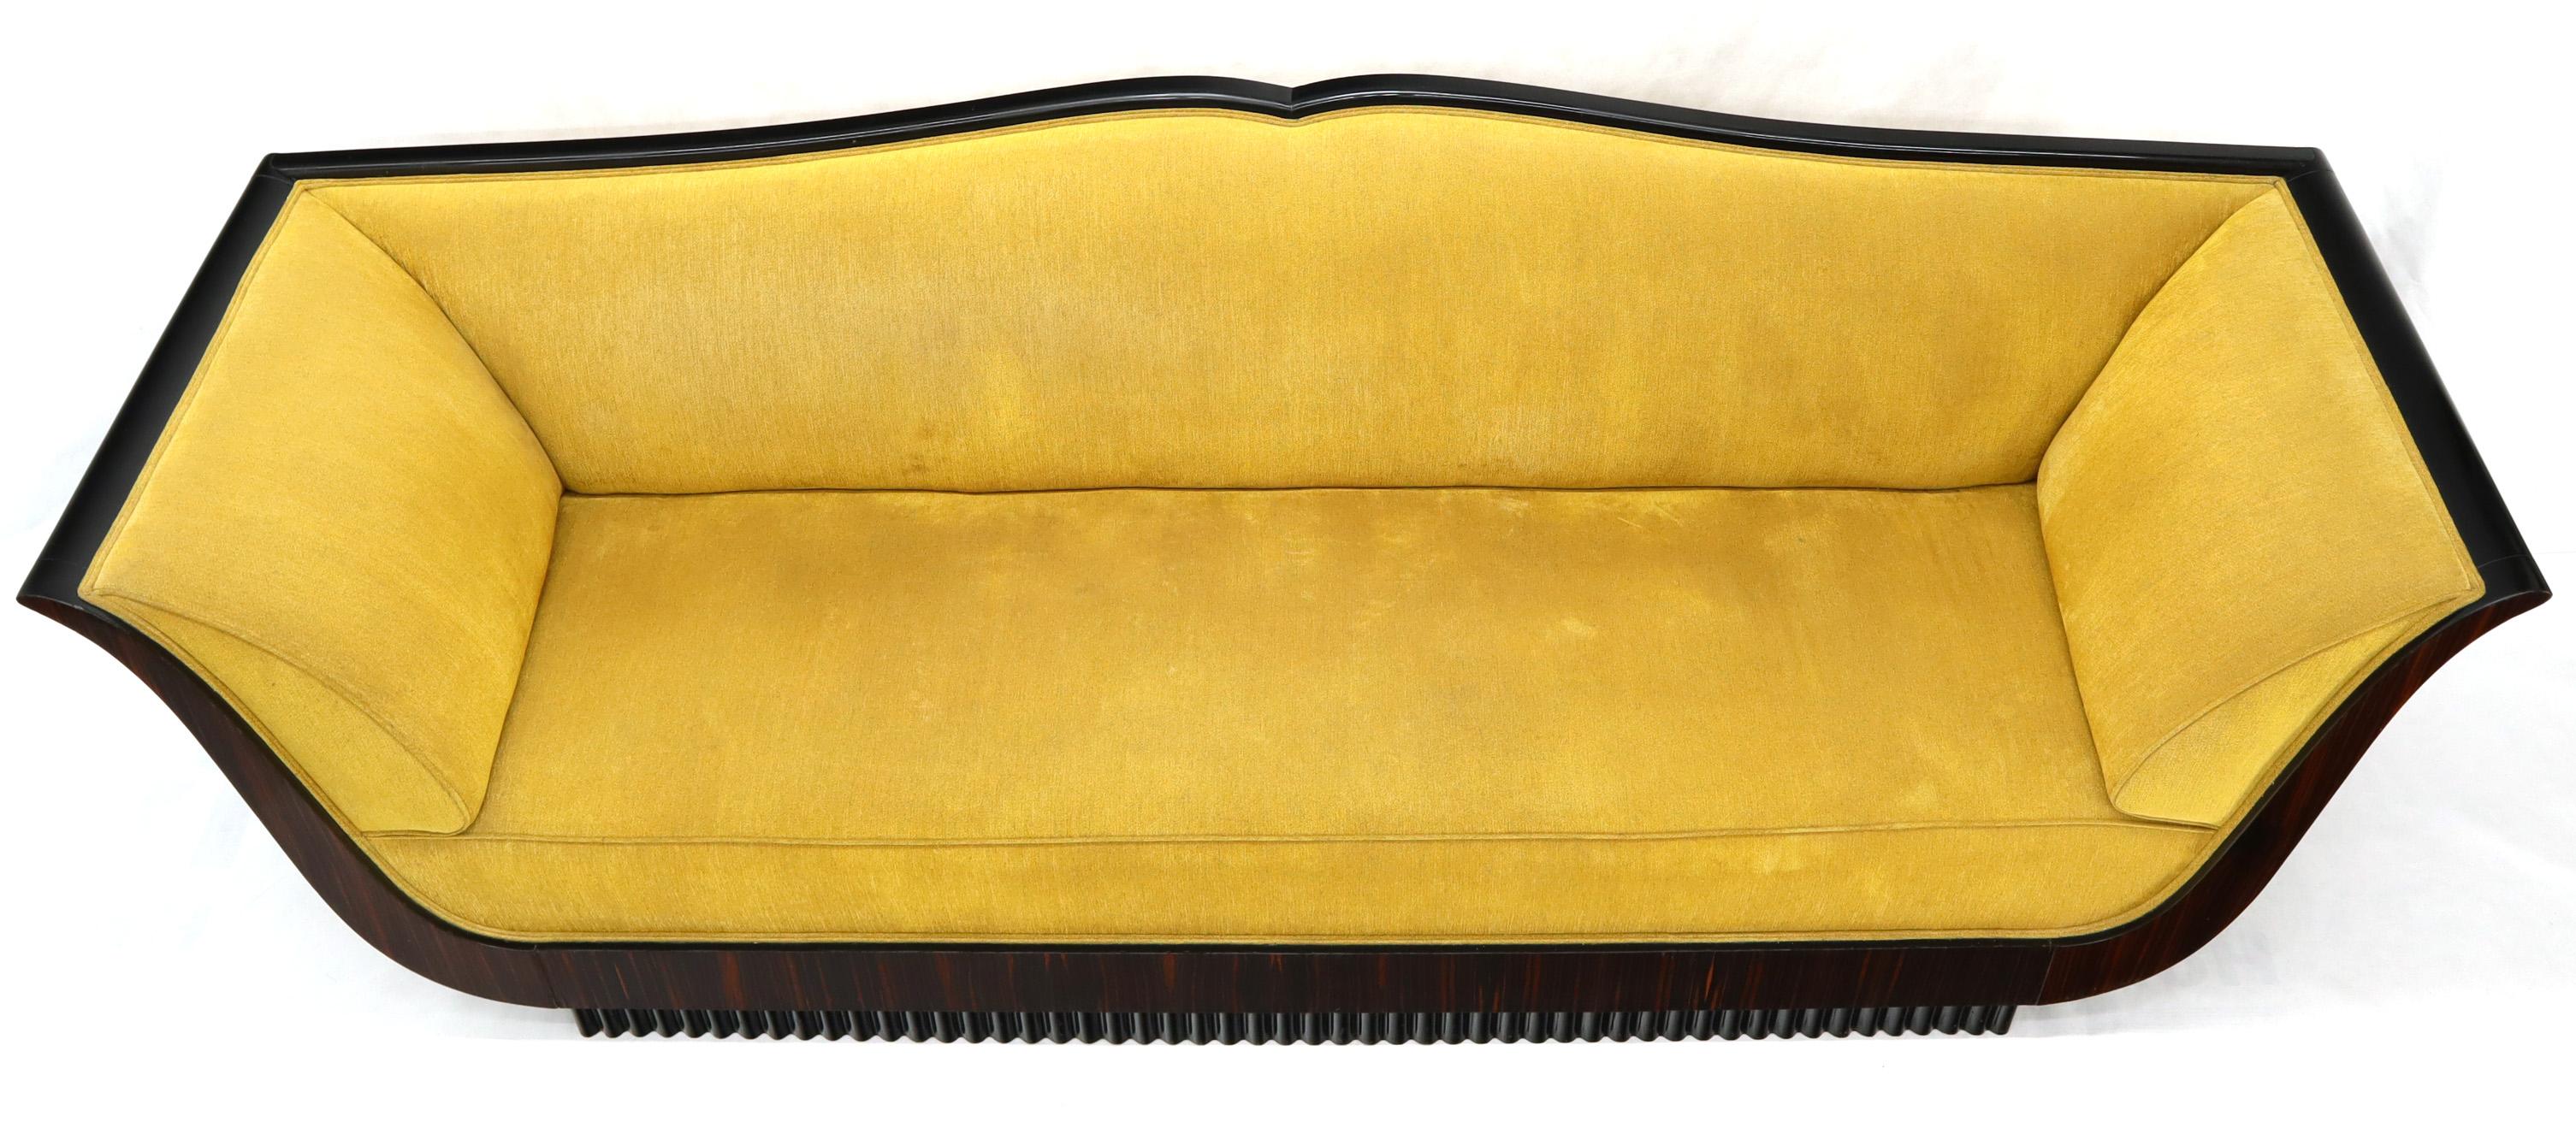 Large French Art Deco Rosewood Sofa in Gold Upholstery Scalloped Edge For Sale 1